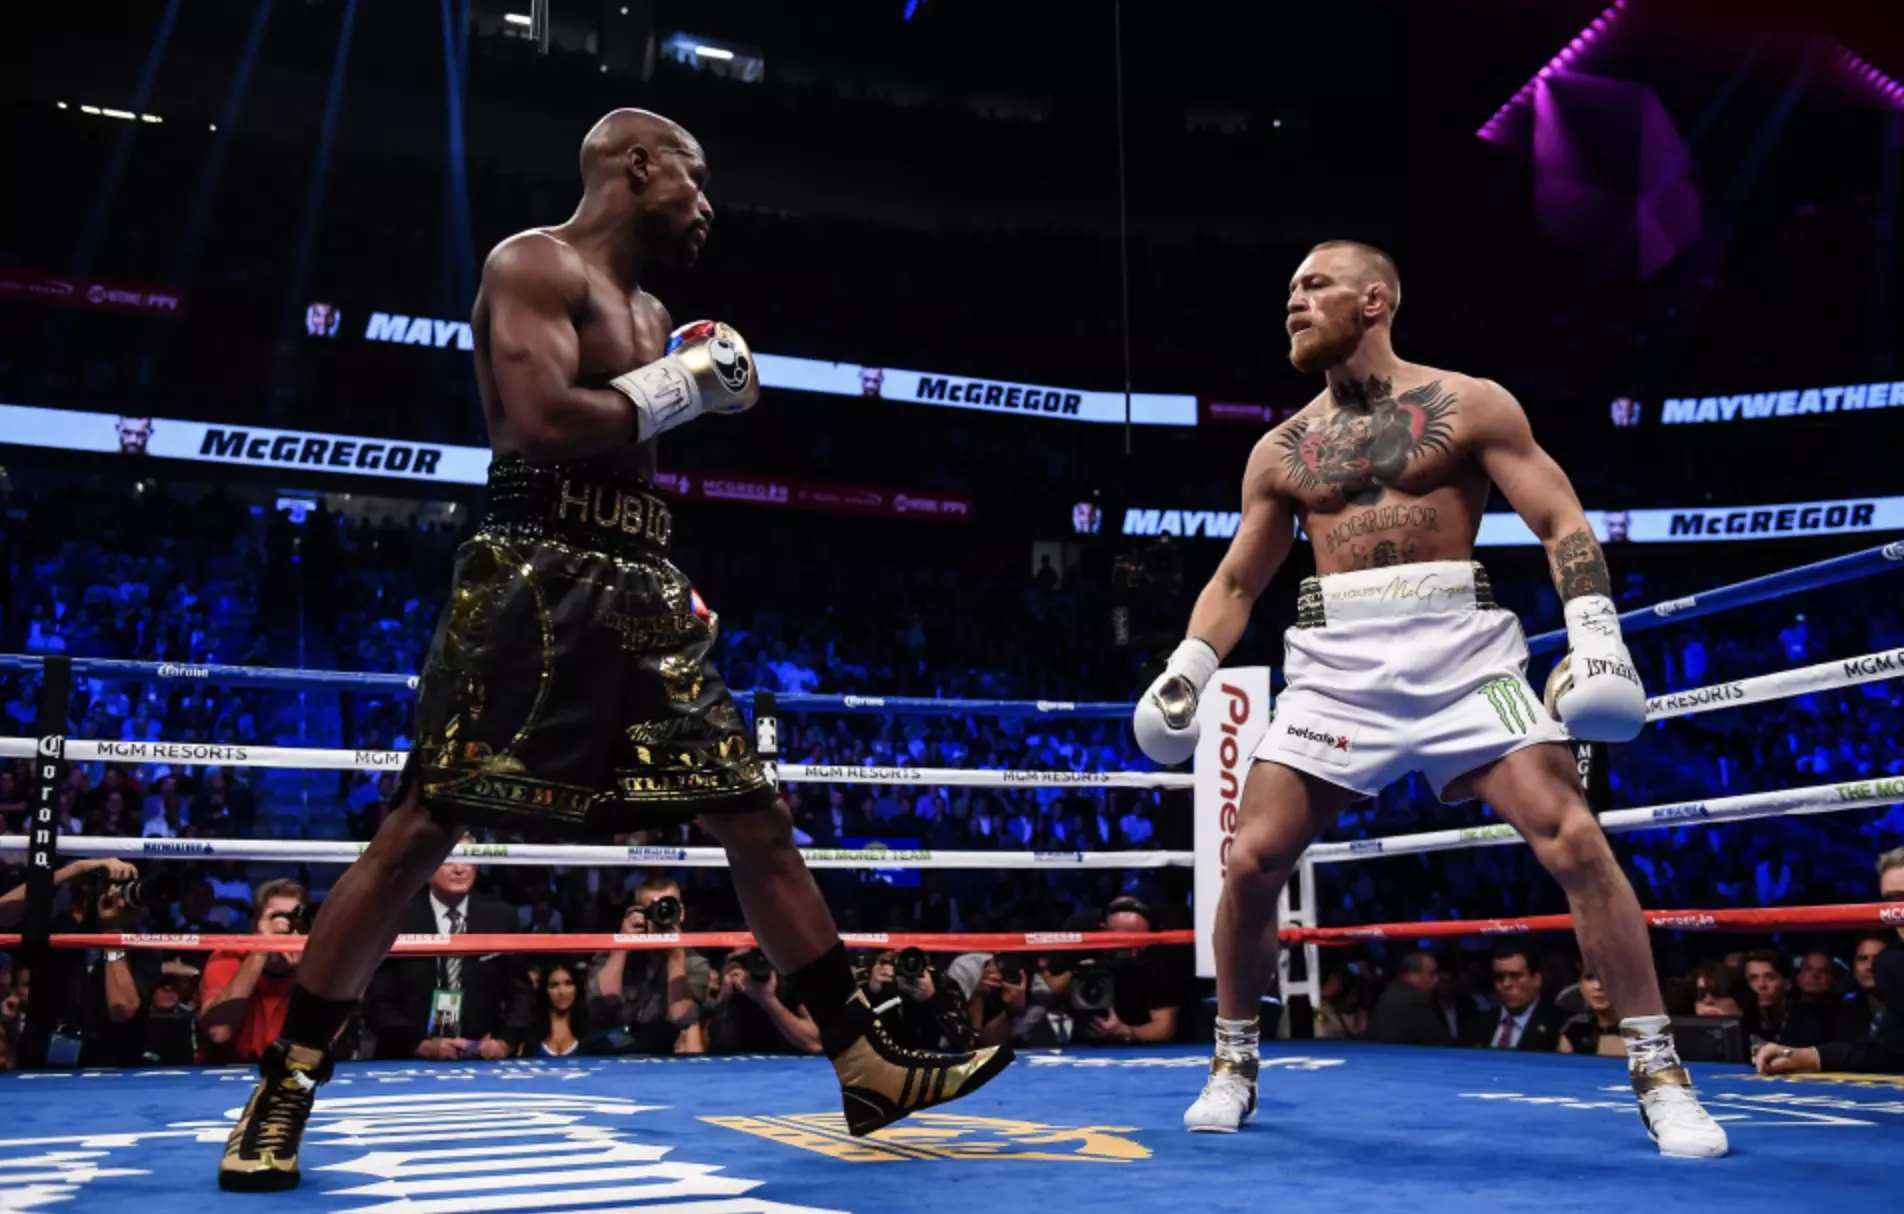 Floyd Mayweather stepped away from professional boxing after his 2017 victory over UFC star Conor McGregor